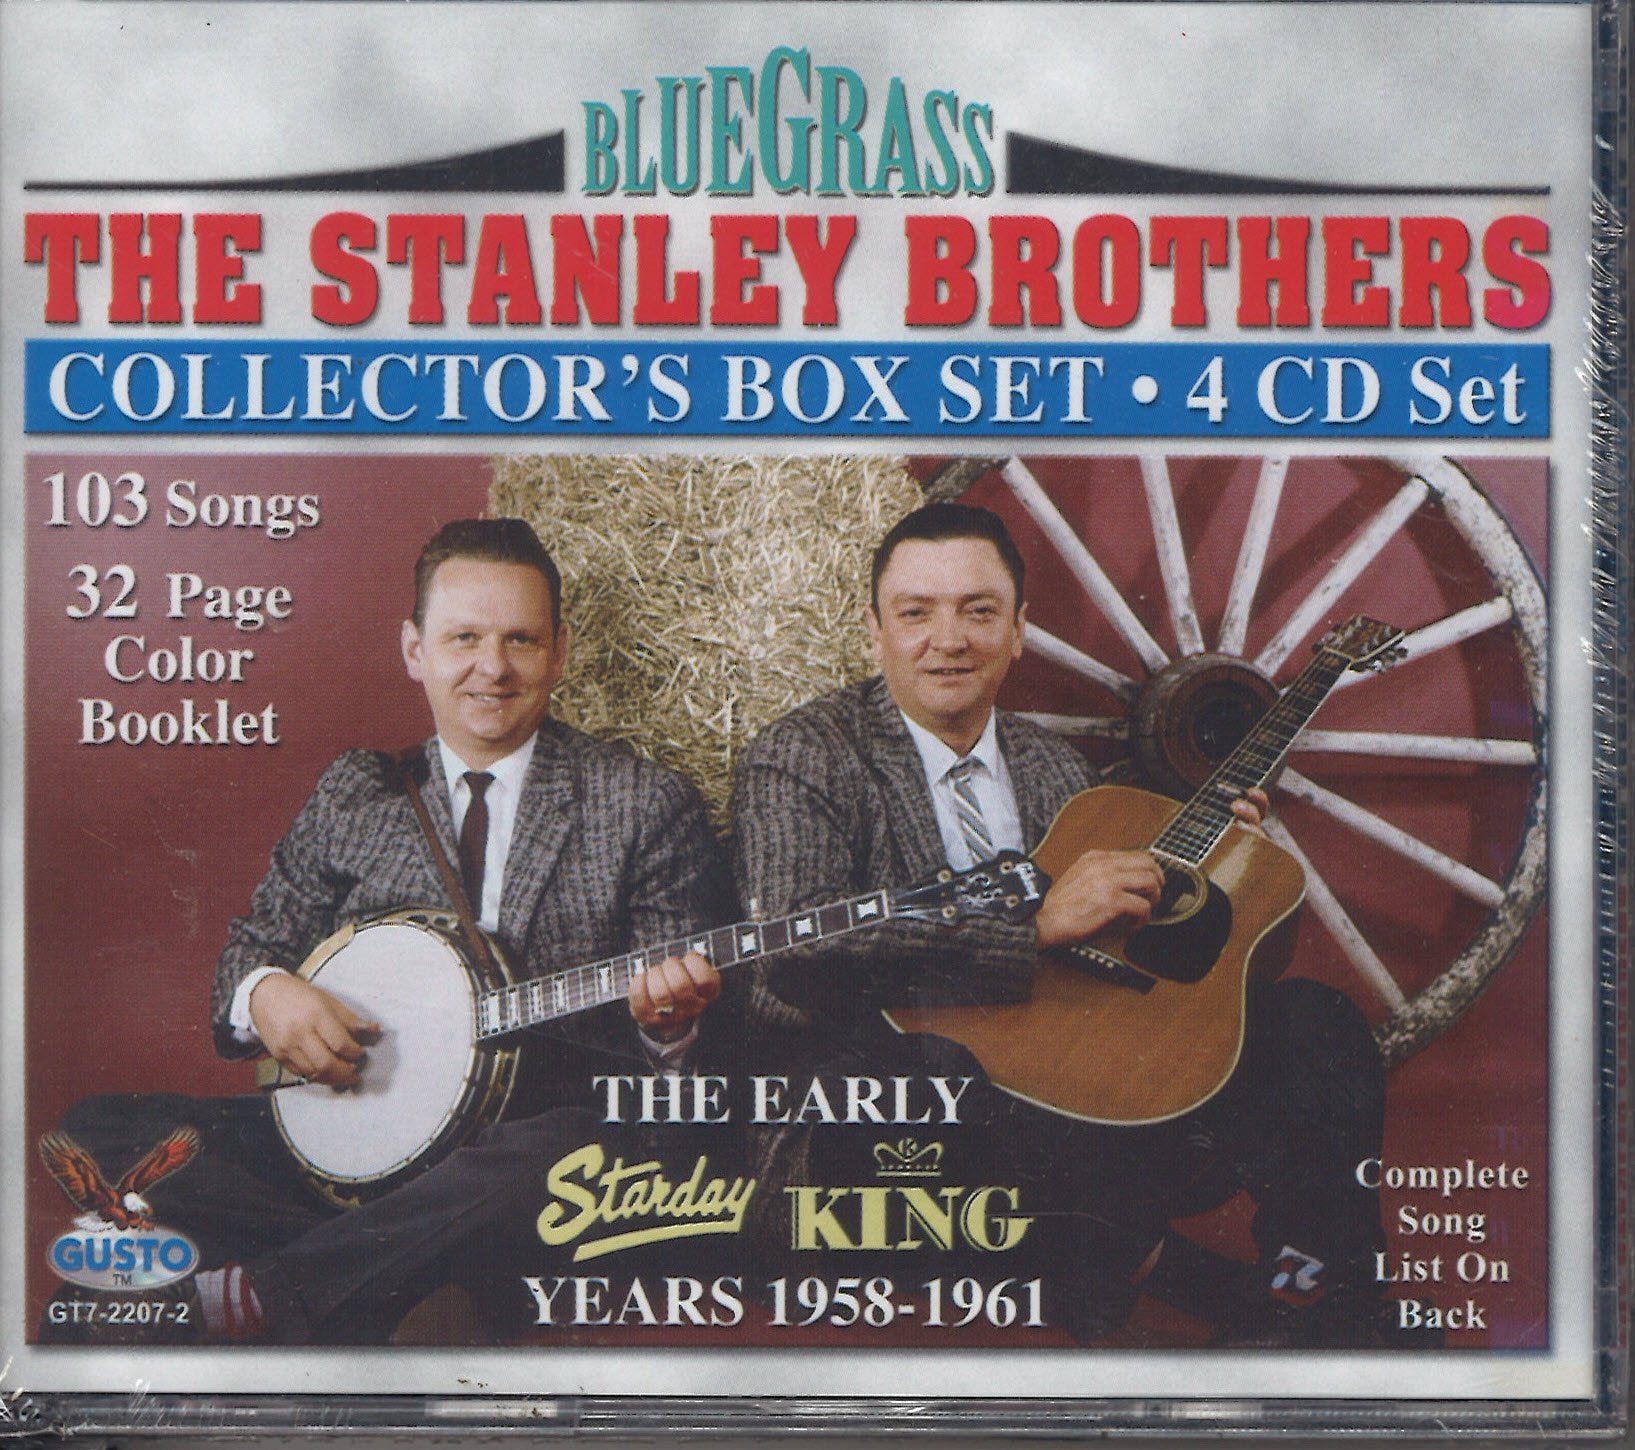 The Stanley Brothers The Early Starday King Years 1958-1961 Collector's Edition: 4 CD Set